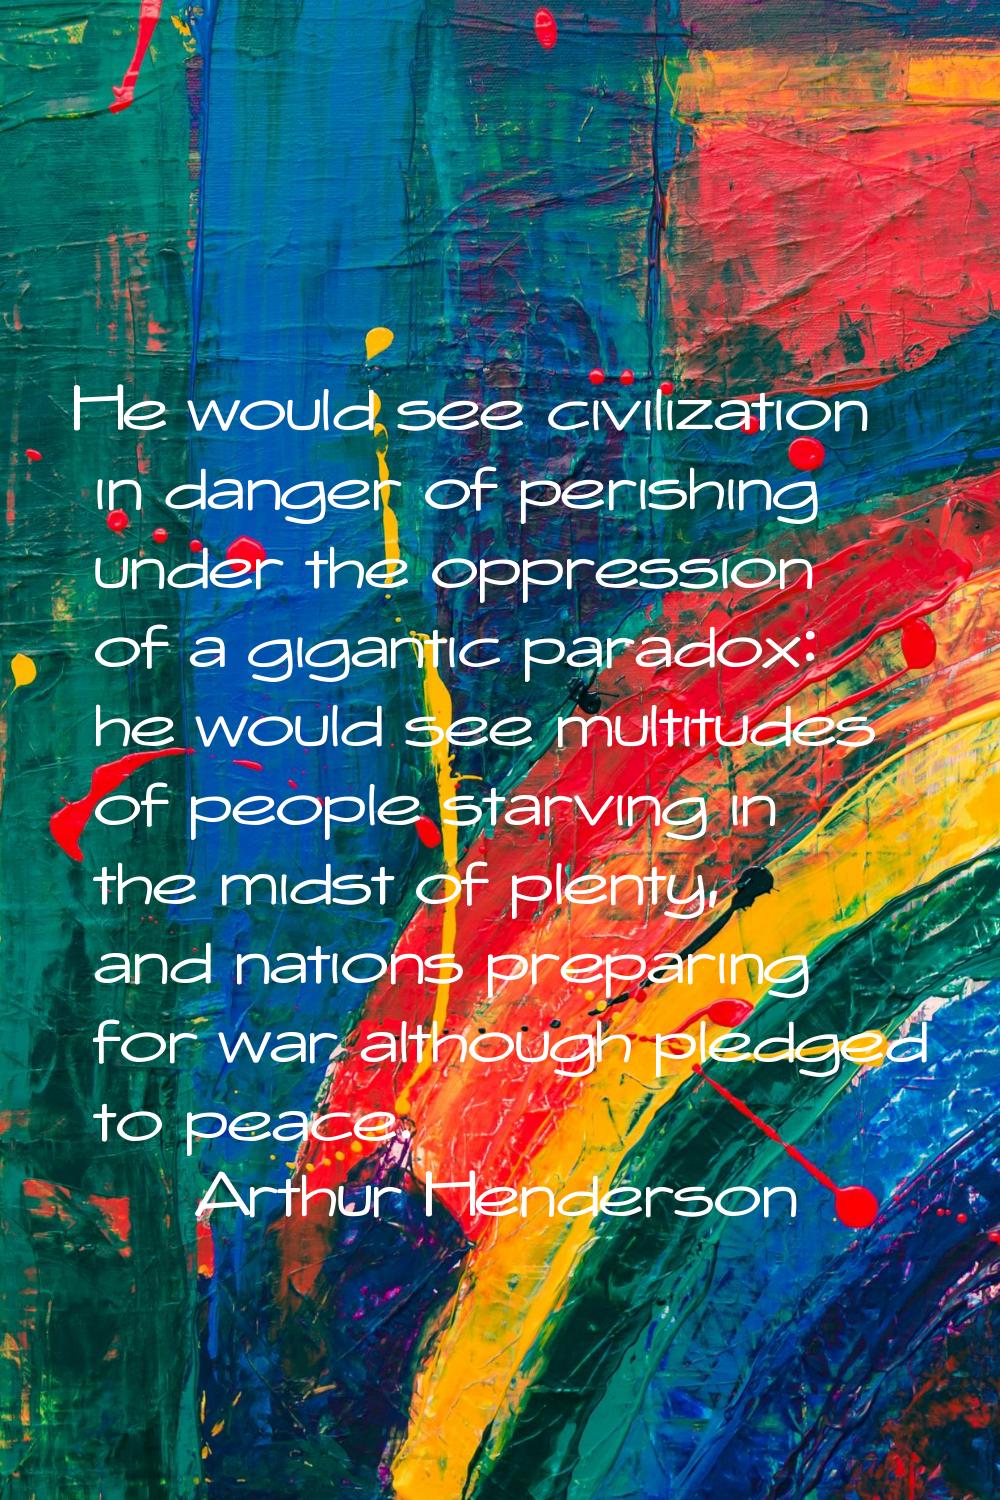 He would see civilization in danger of perishing under the oppression of a gigantic paradox: he wou